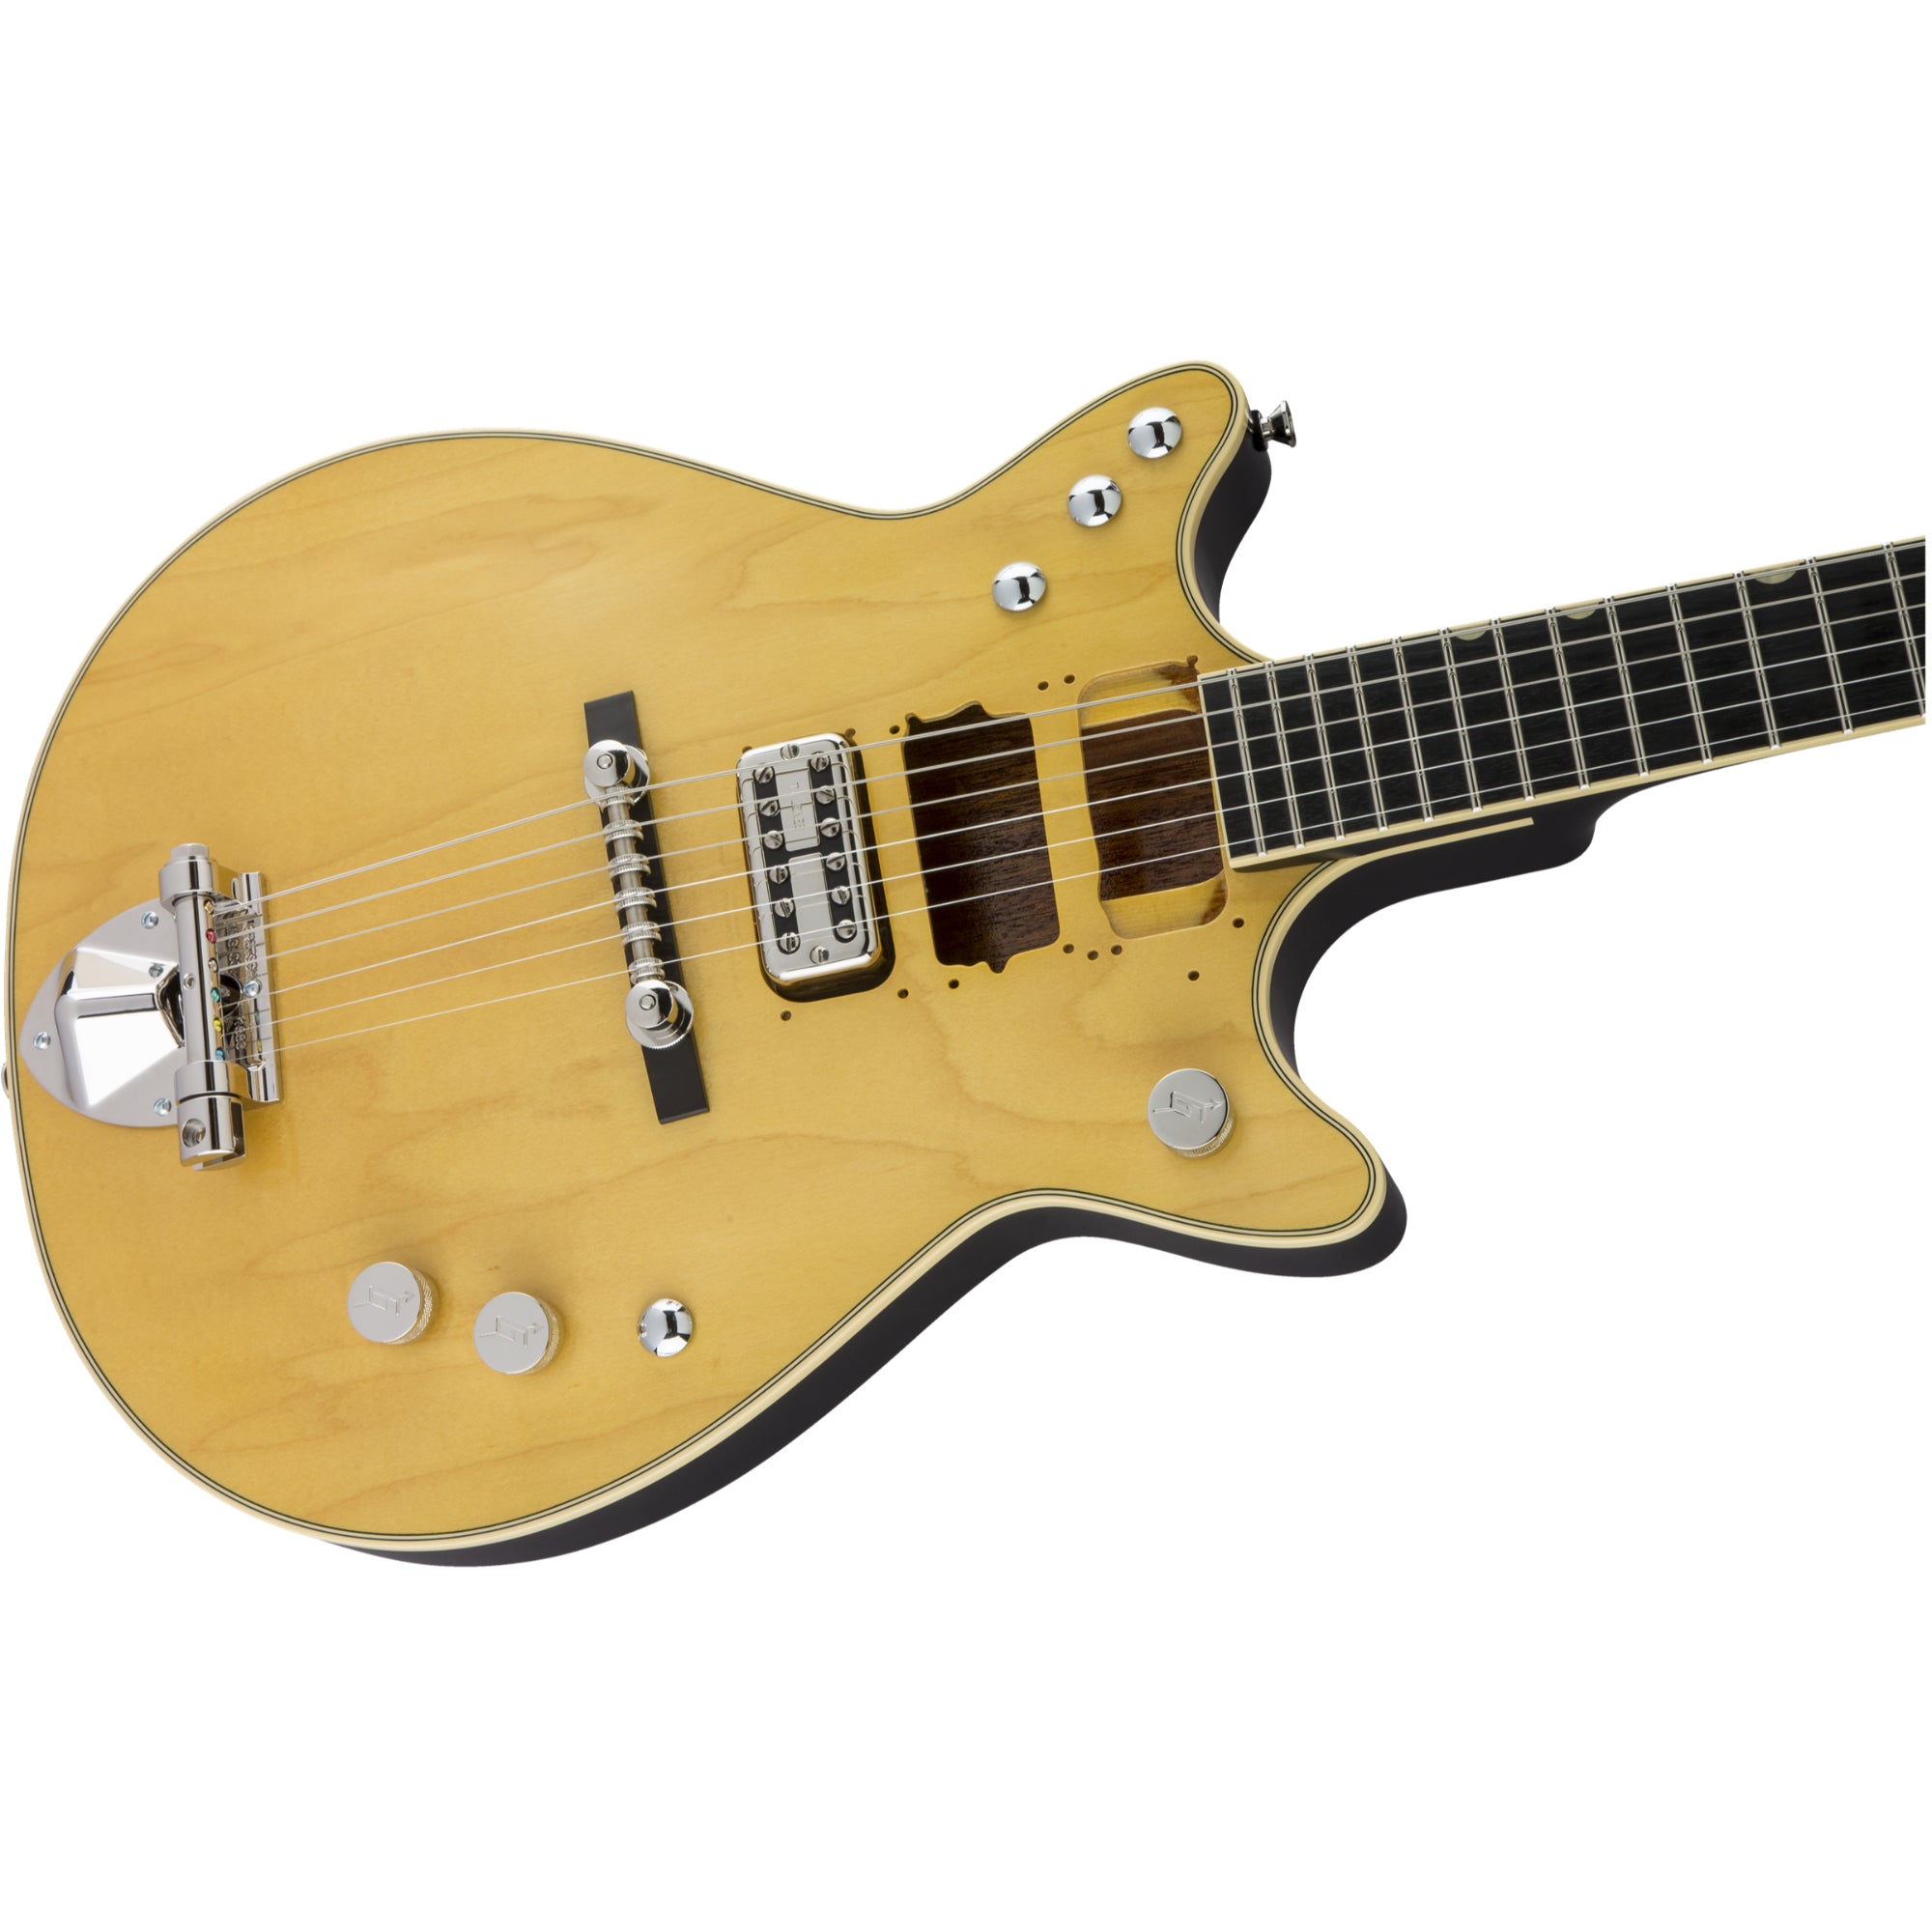 Gretsch G6131-MY Malcolm Young Signature Jet, Natural